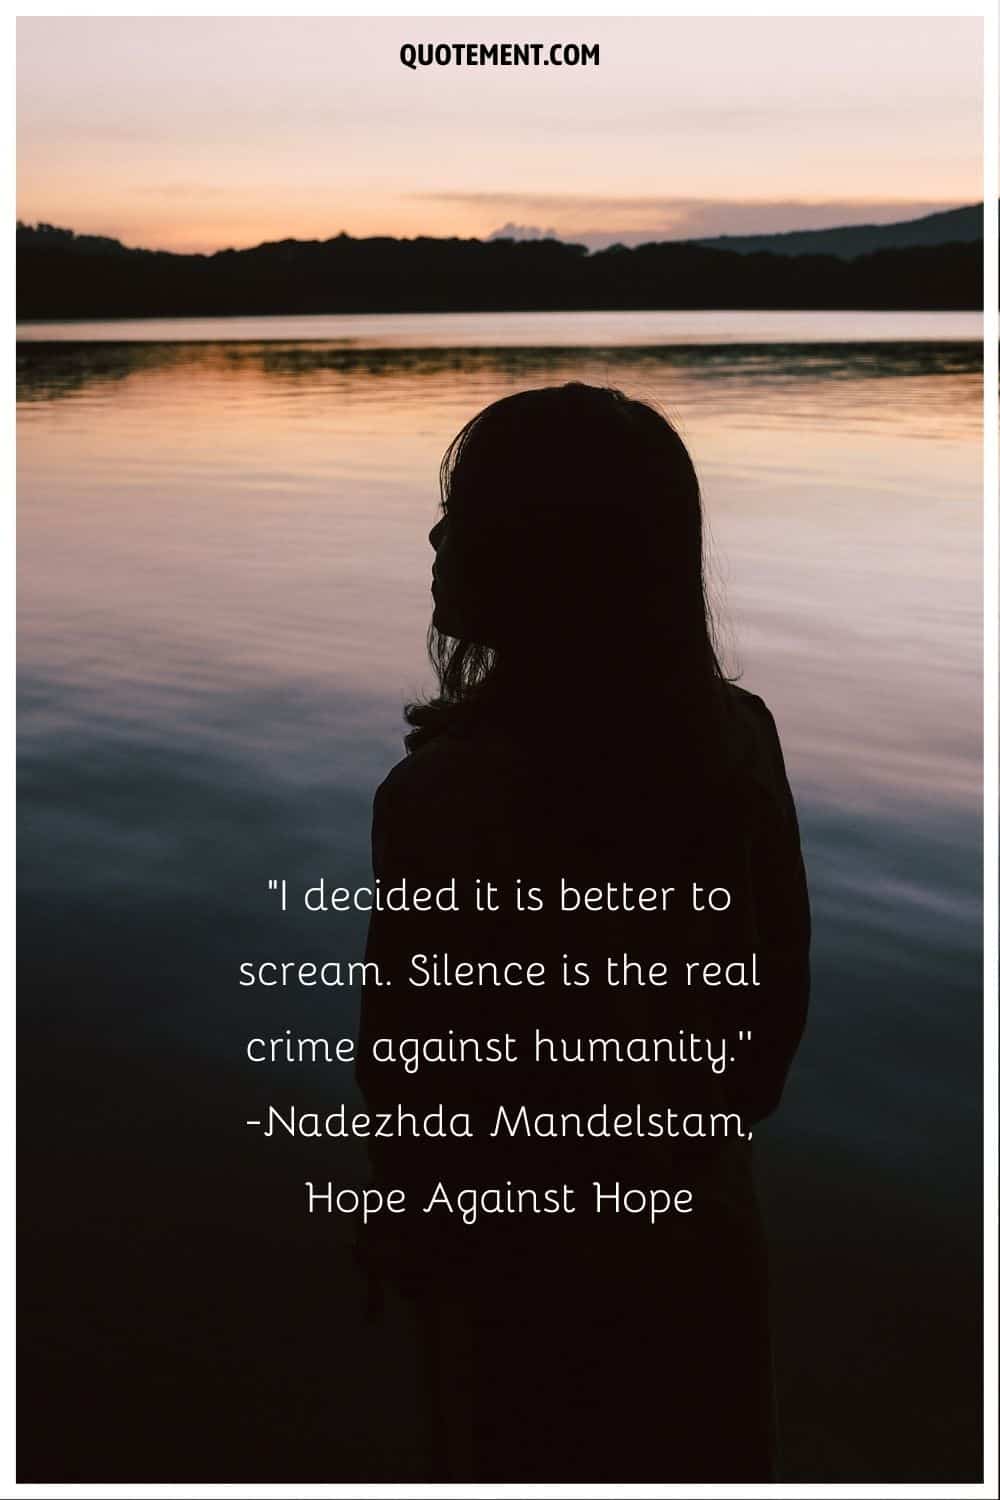 “I decided it is better to scream. Silence is the real crime against humanity.” ― Nadezhda Mandelstam, Hope Against Hope